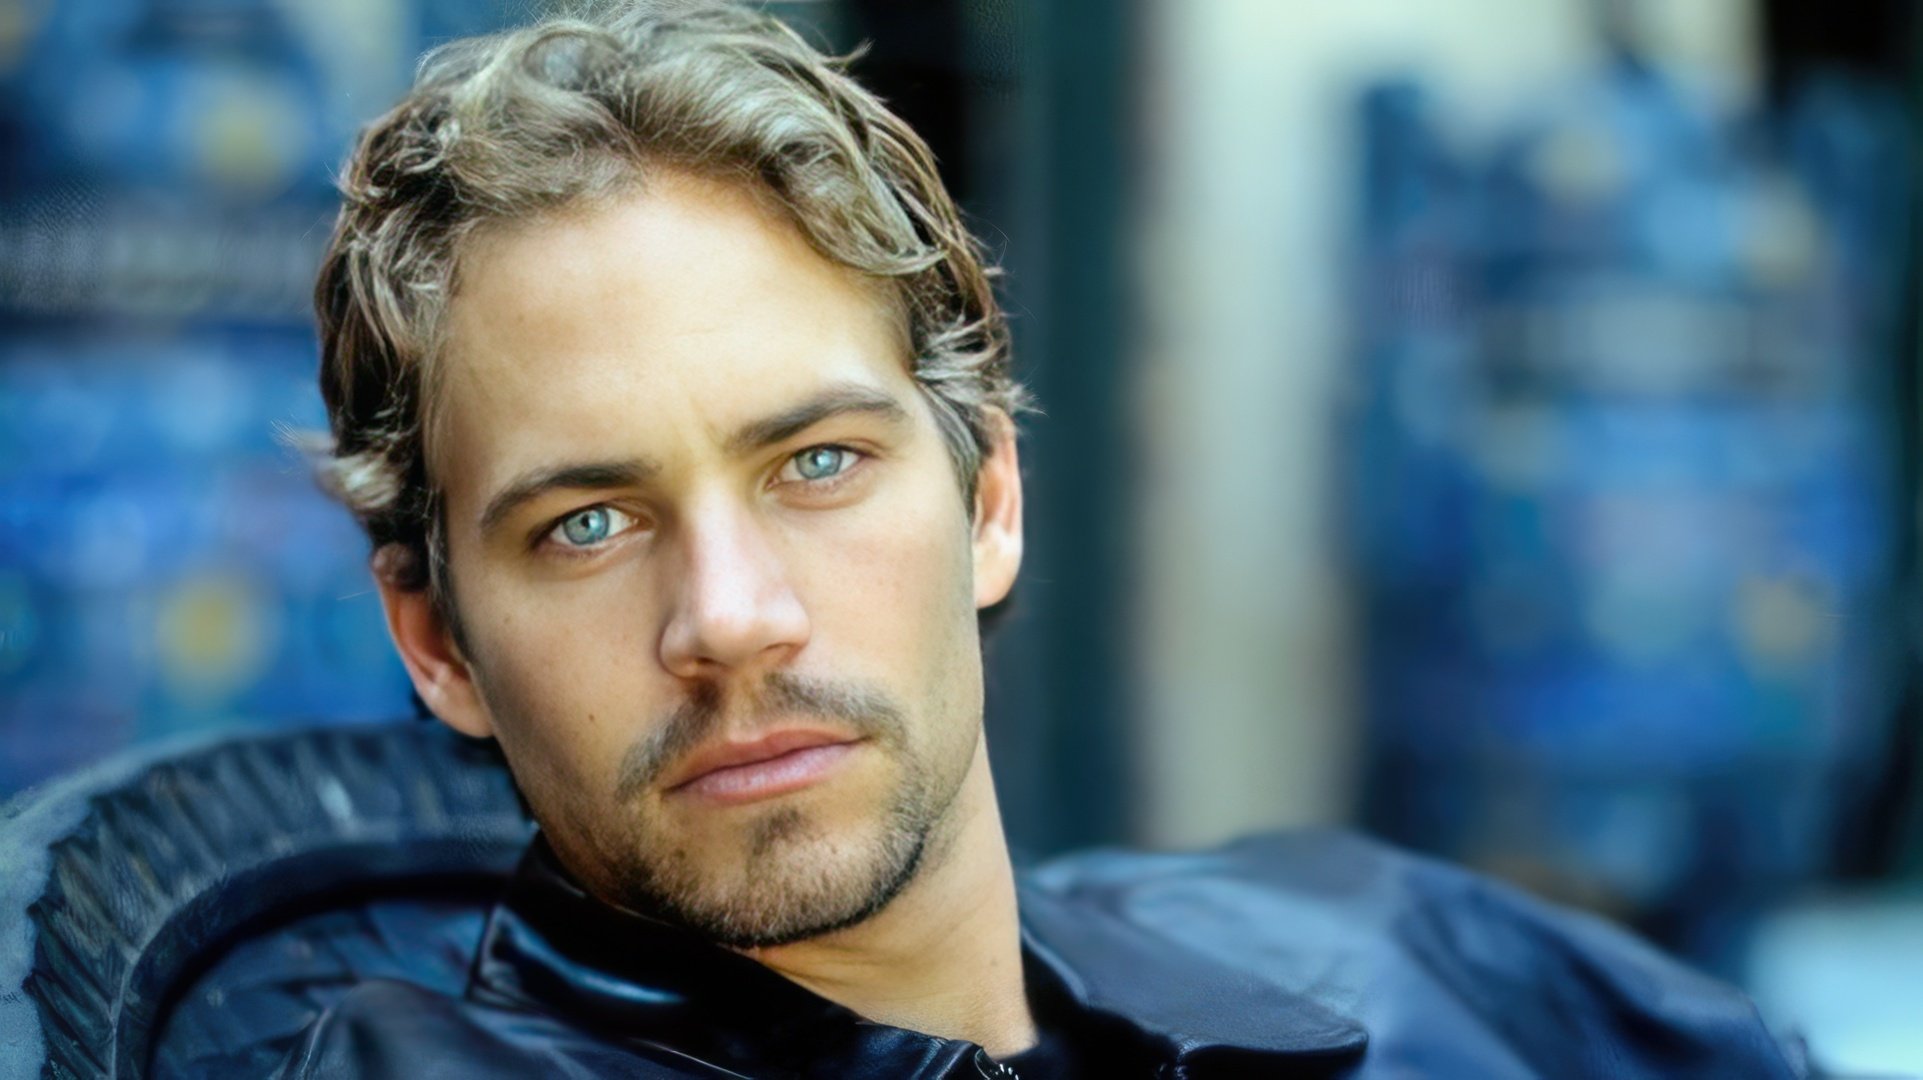 In 2018, a documentary about Paul Walker was released